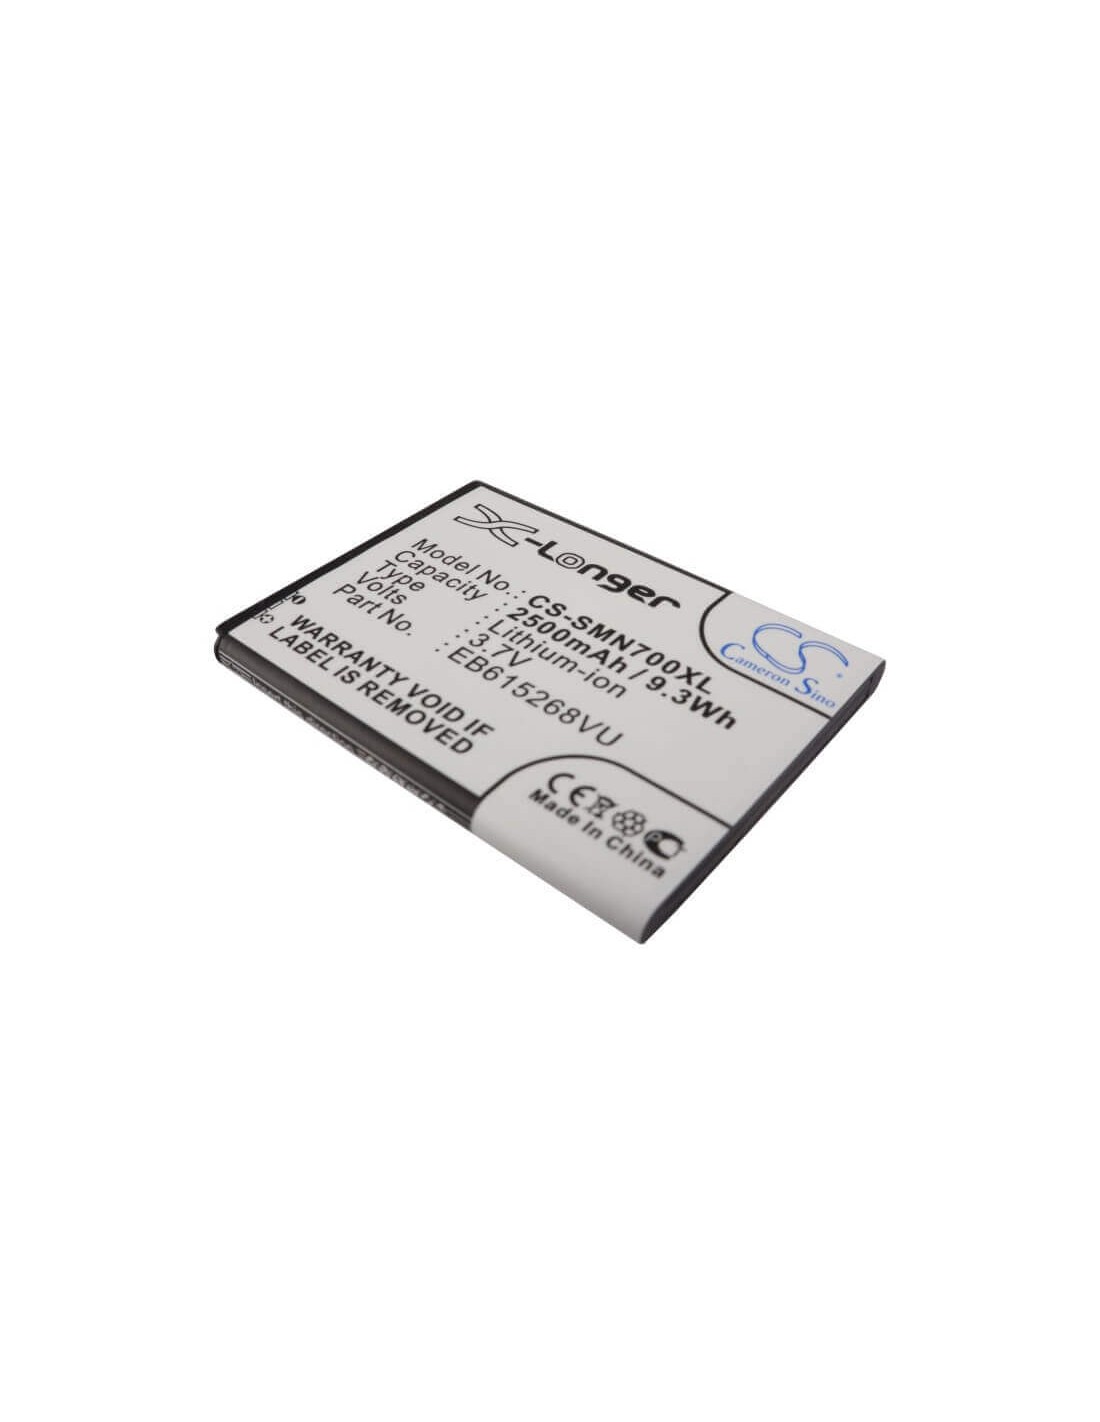 Battery for Samsung Galaxy Note, GT-N7000, GT-I9220 3.7V, 2500mAh - 9.25Wh